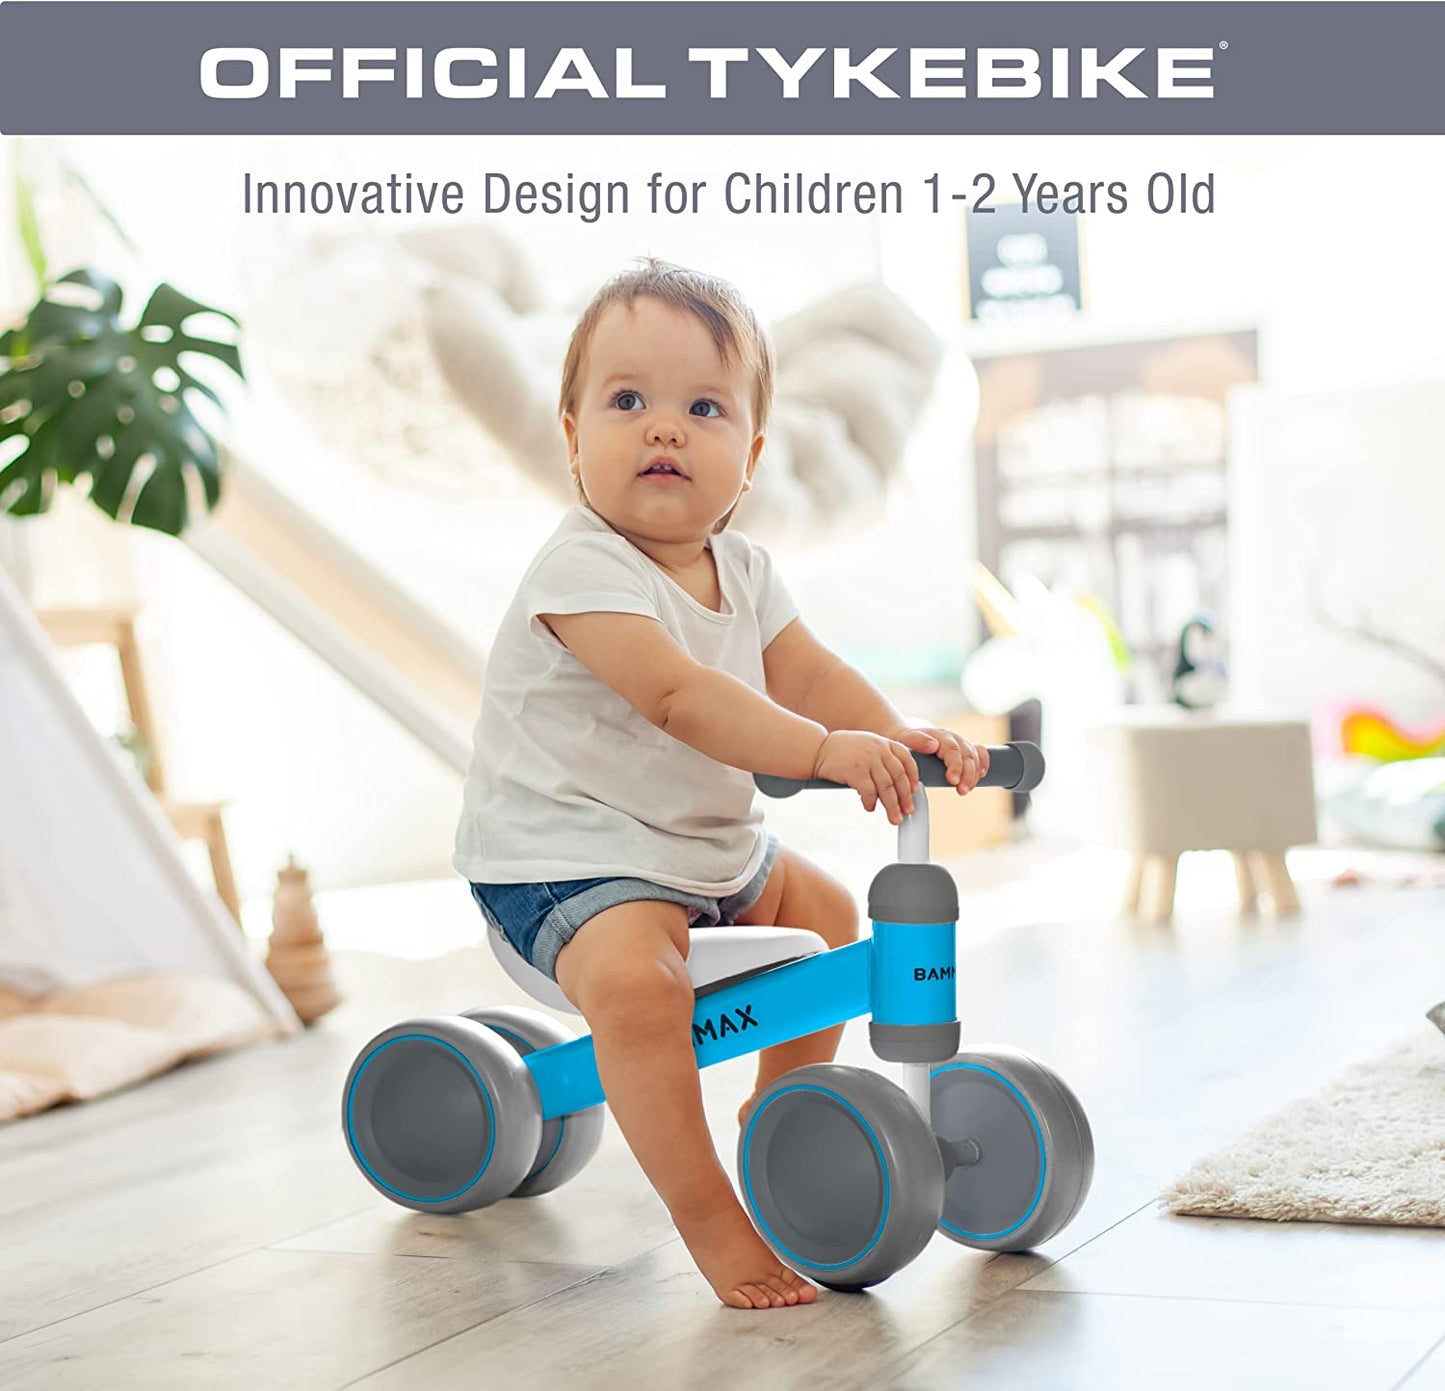 Official Tykebike® Toddler & Baby Bike | Toddler & Baby Balance Bike Ride on Toy | Easy Glide Wheels & Safer Toddler Bike Steering | Indoor/Outdoor Baby & Toddler Ride on Toy for 1+ Year Old